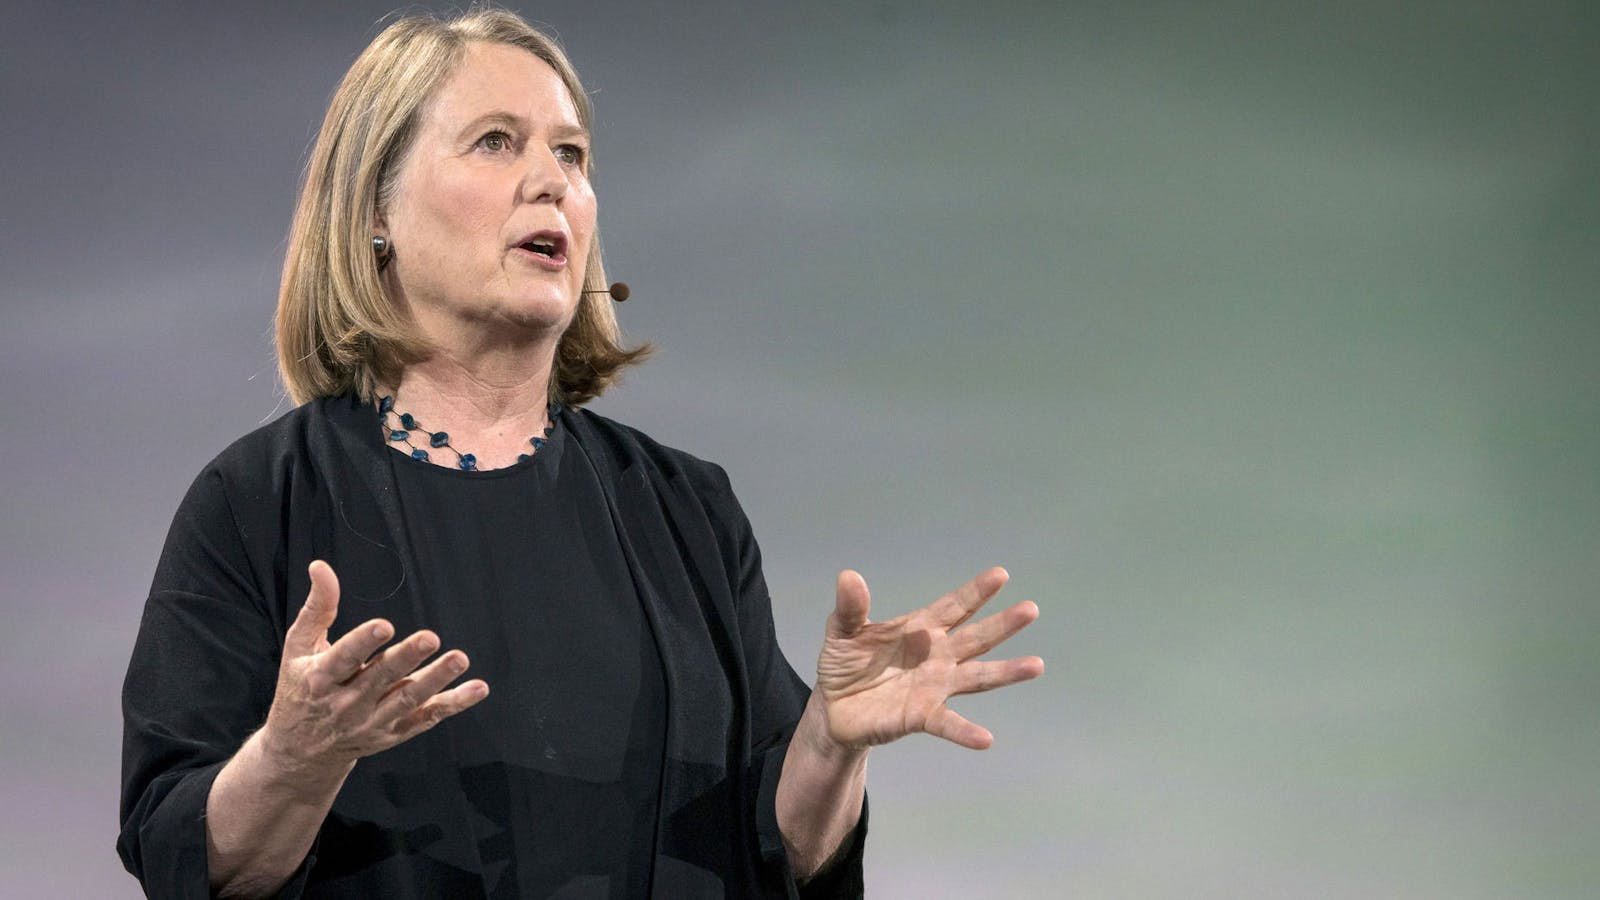 Google Cloud CEO Diane Greene on Tuesday at a company event in San Francisco. Photo: Bloomberg